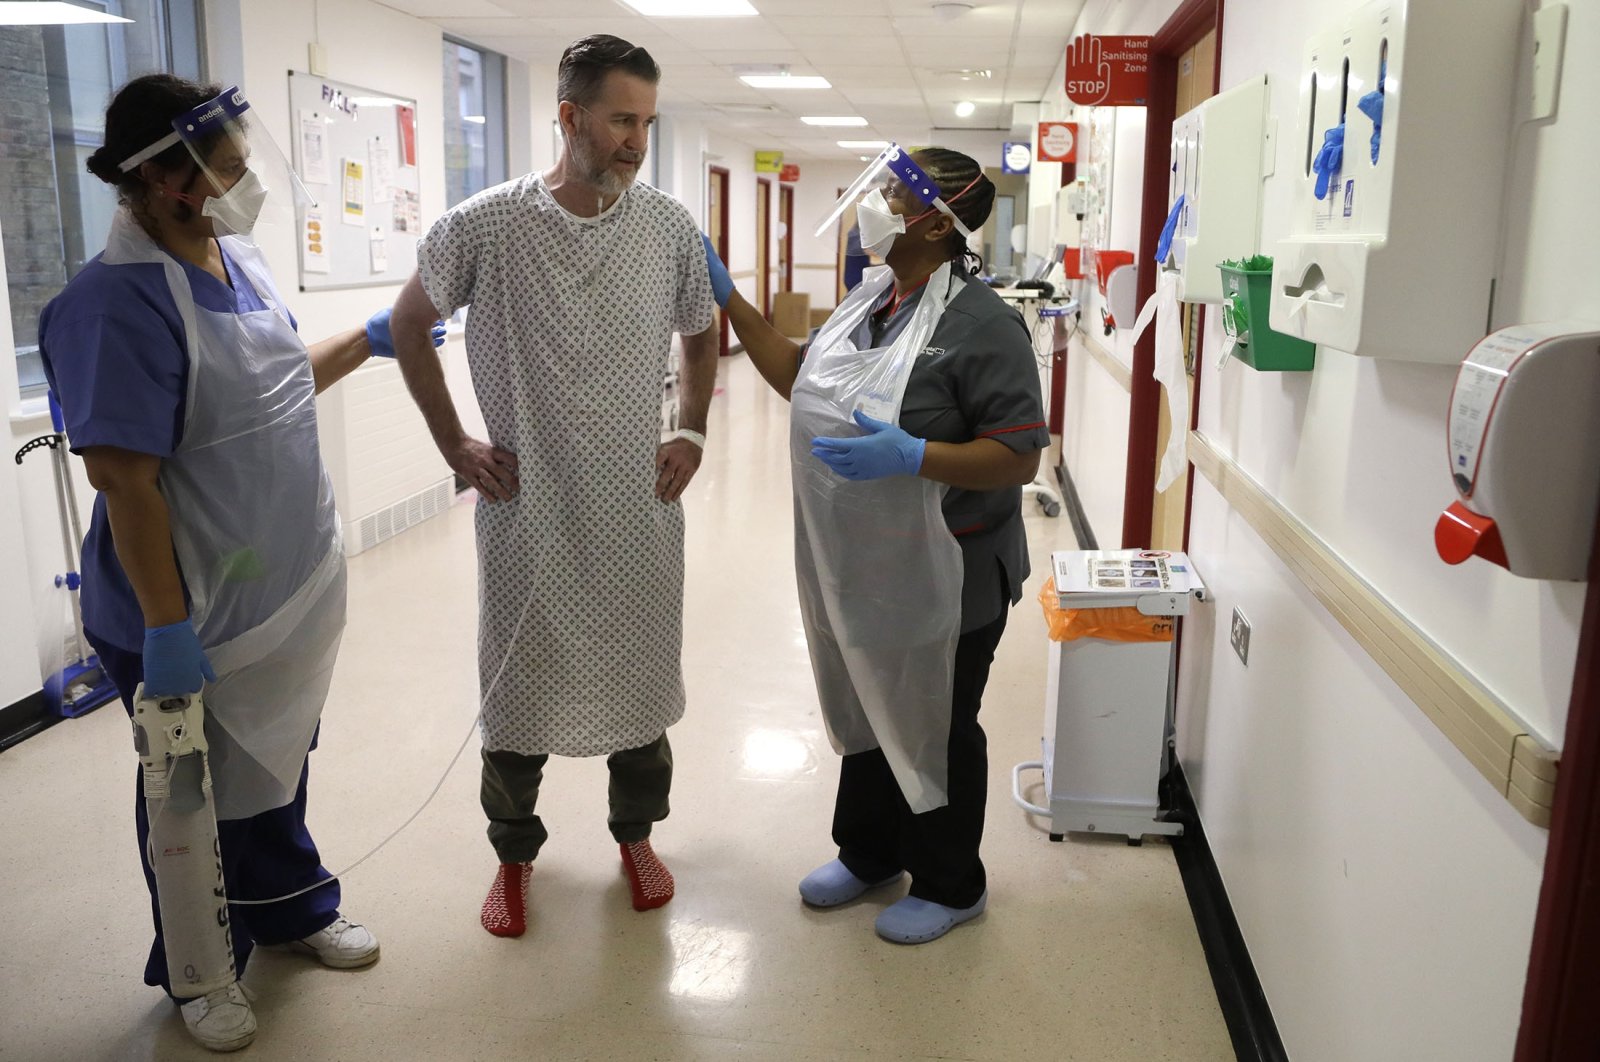 Anna Castellano (L), a senior nurse, and Felicia Kwaku (R), the associate director of nursing, help recovering COVID-19 patient Justin Fleming walk again, in the Cotton ward at King's College Hospital in London, U.K., Jan. 27, 2021. (AP Photo)